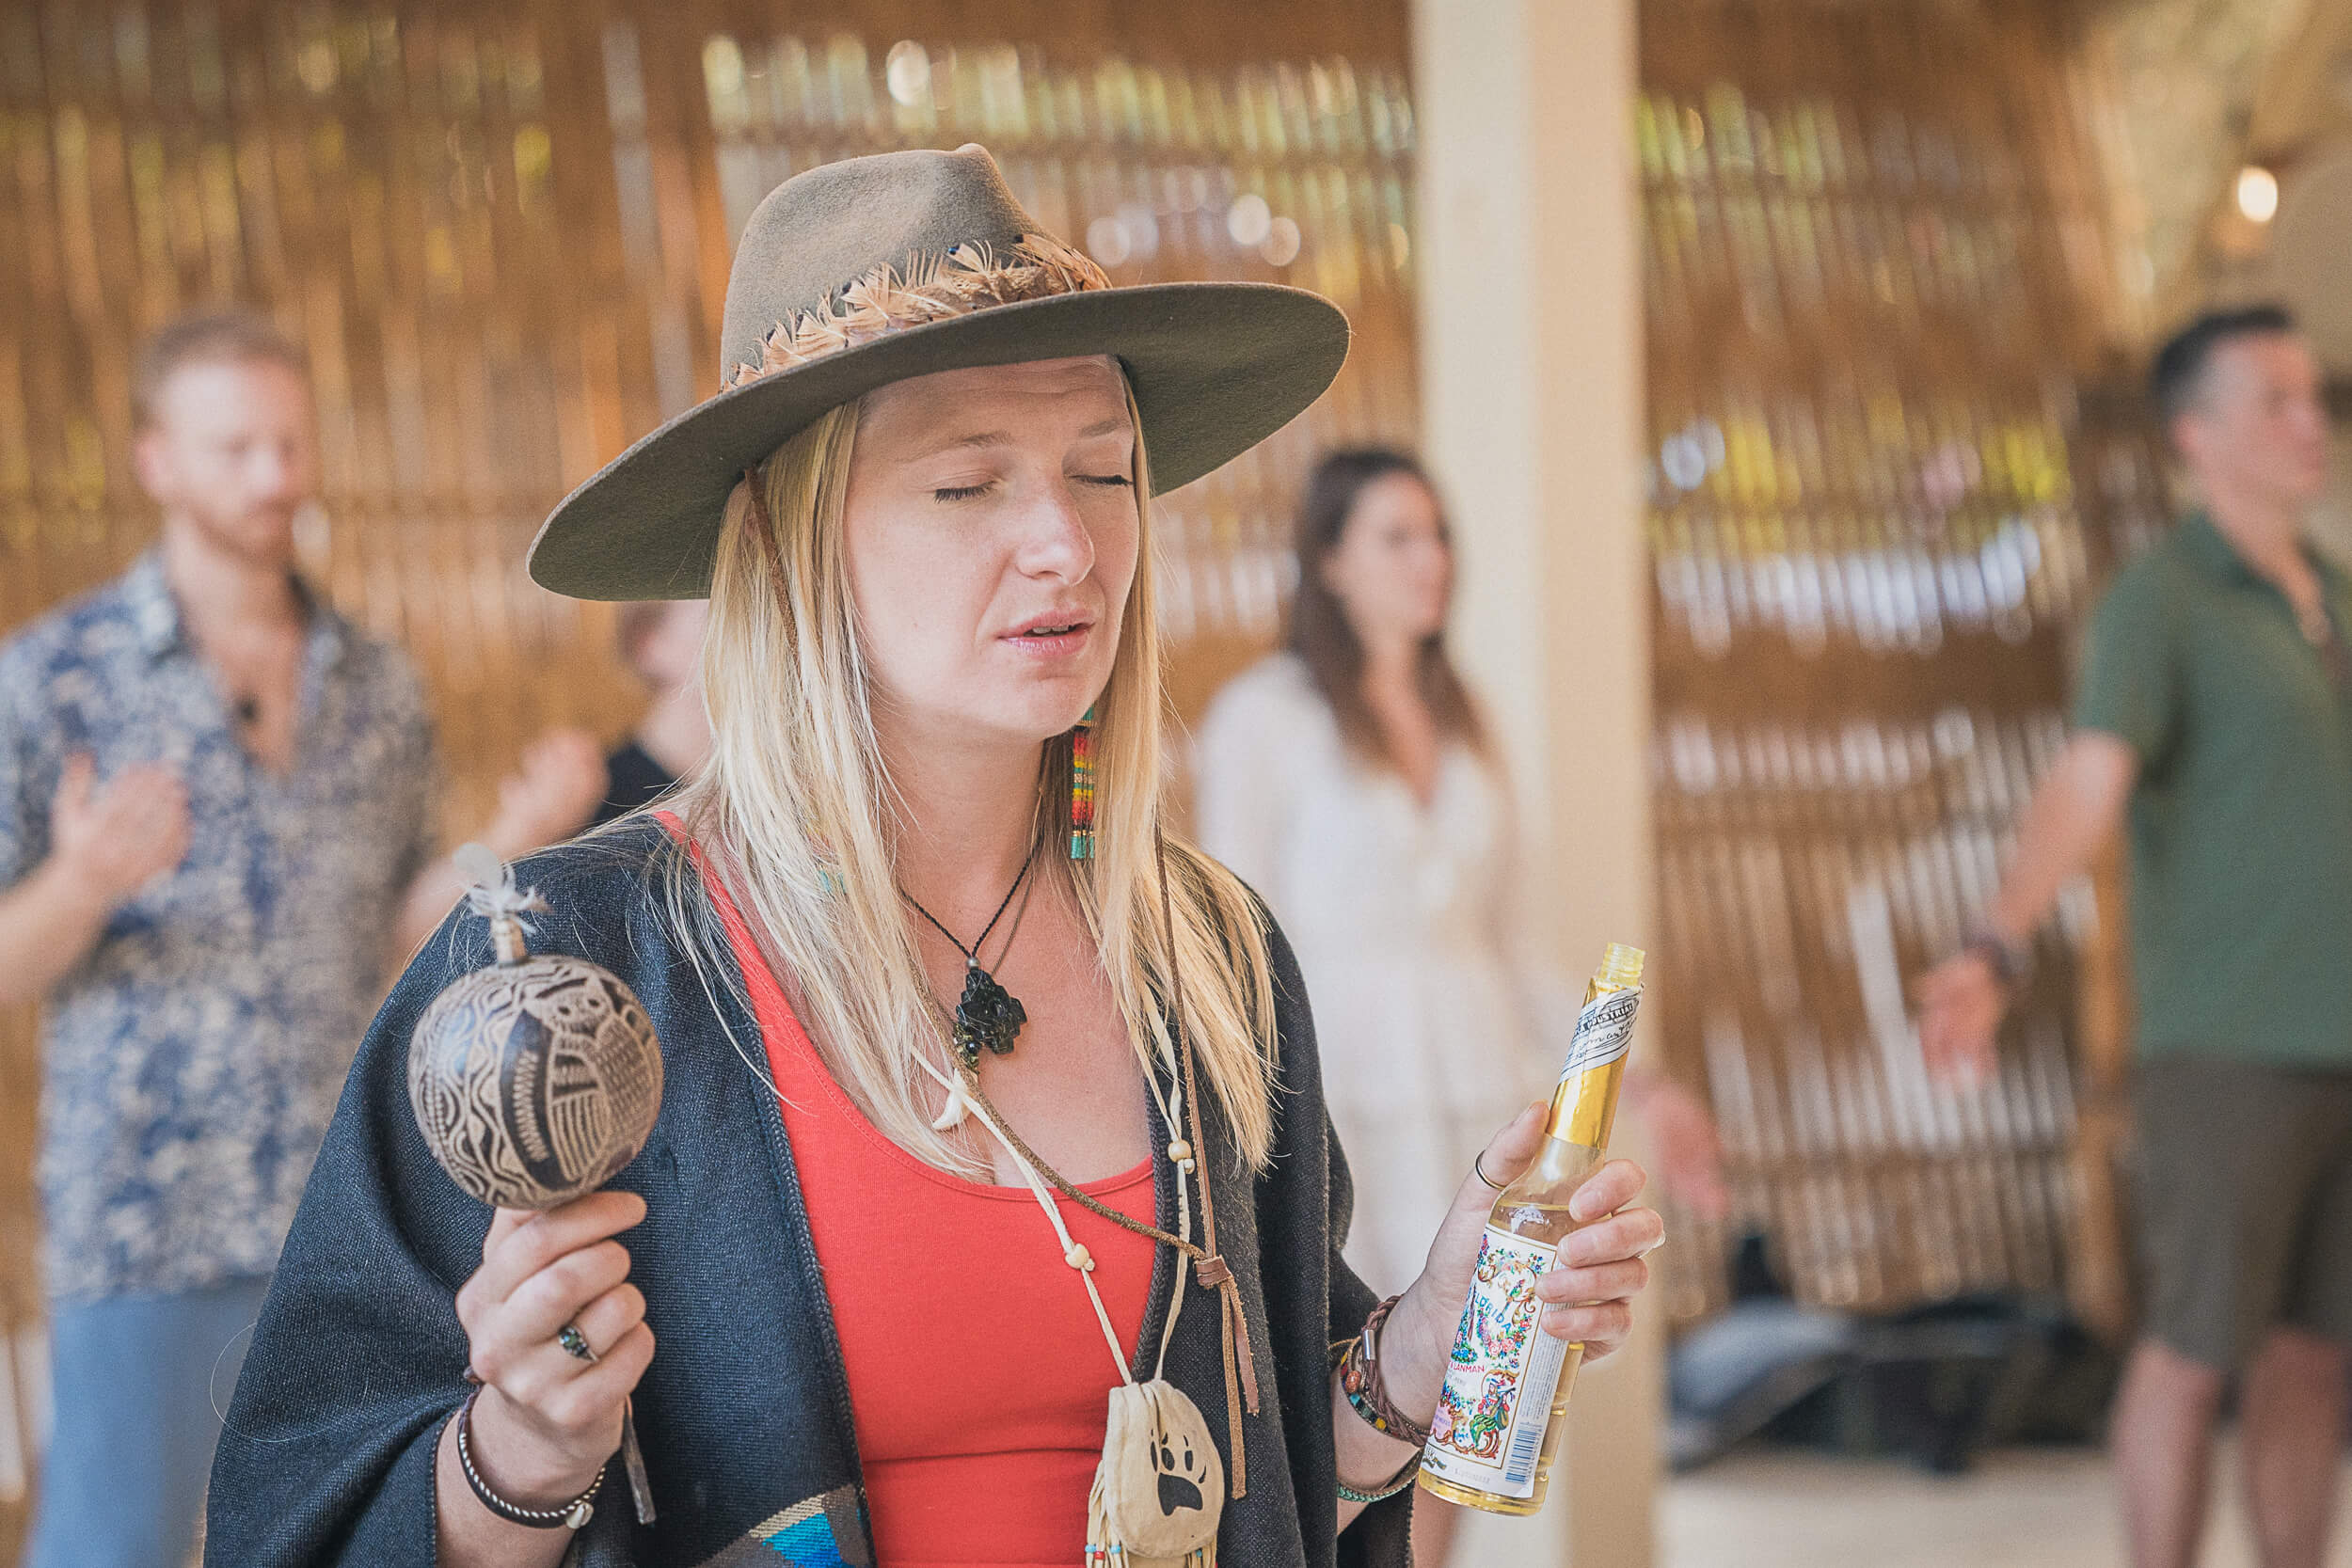 Lifestyle photographer captures a spiritual ceremony with a focused woman in a hat holding a maraca and a bottle of Agua de Florida, with participants in meditation in the background.